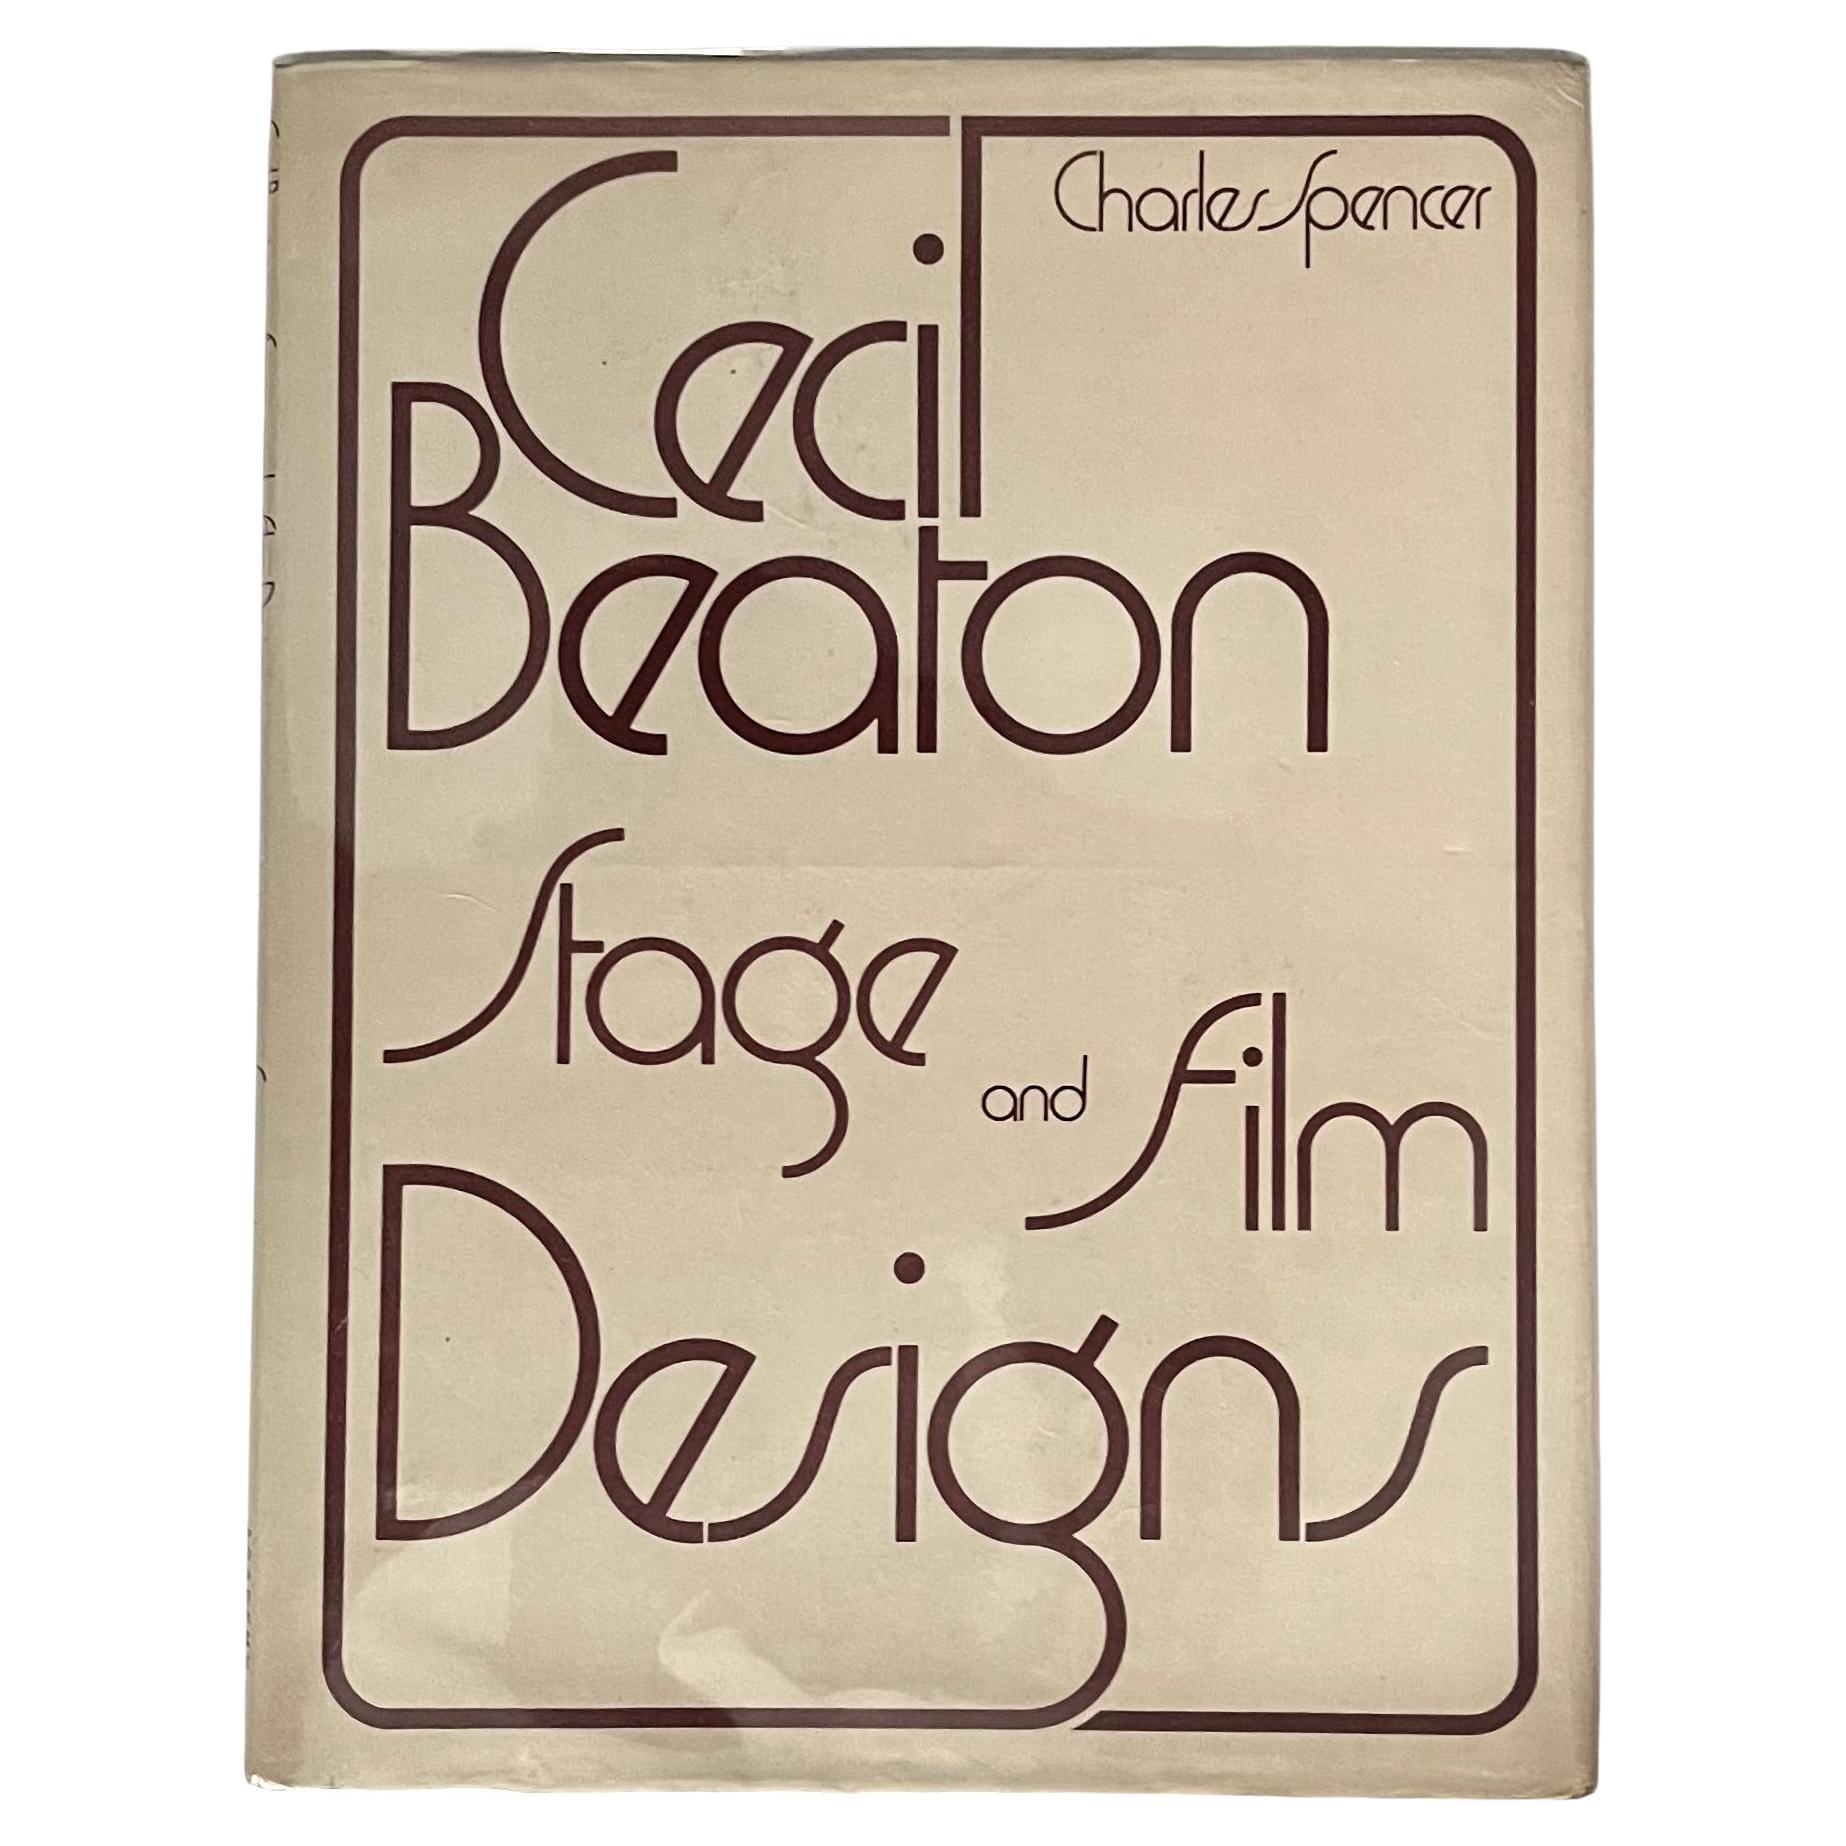 Cecil Beaton Stage and Film Designs - Charles Spencer - 1st edition,  1975